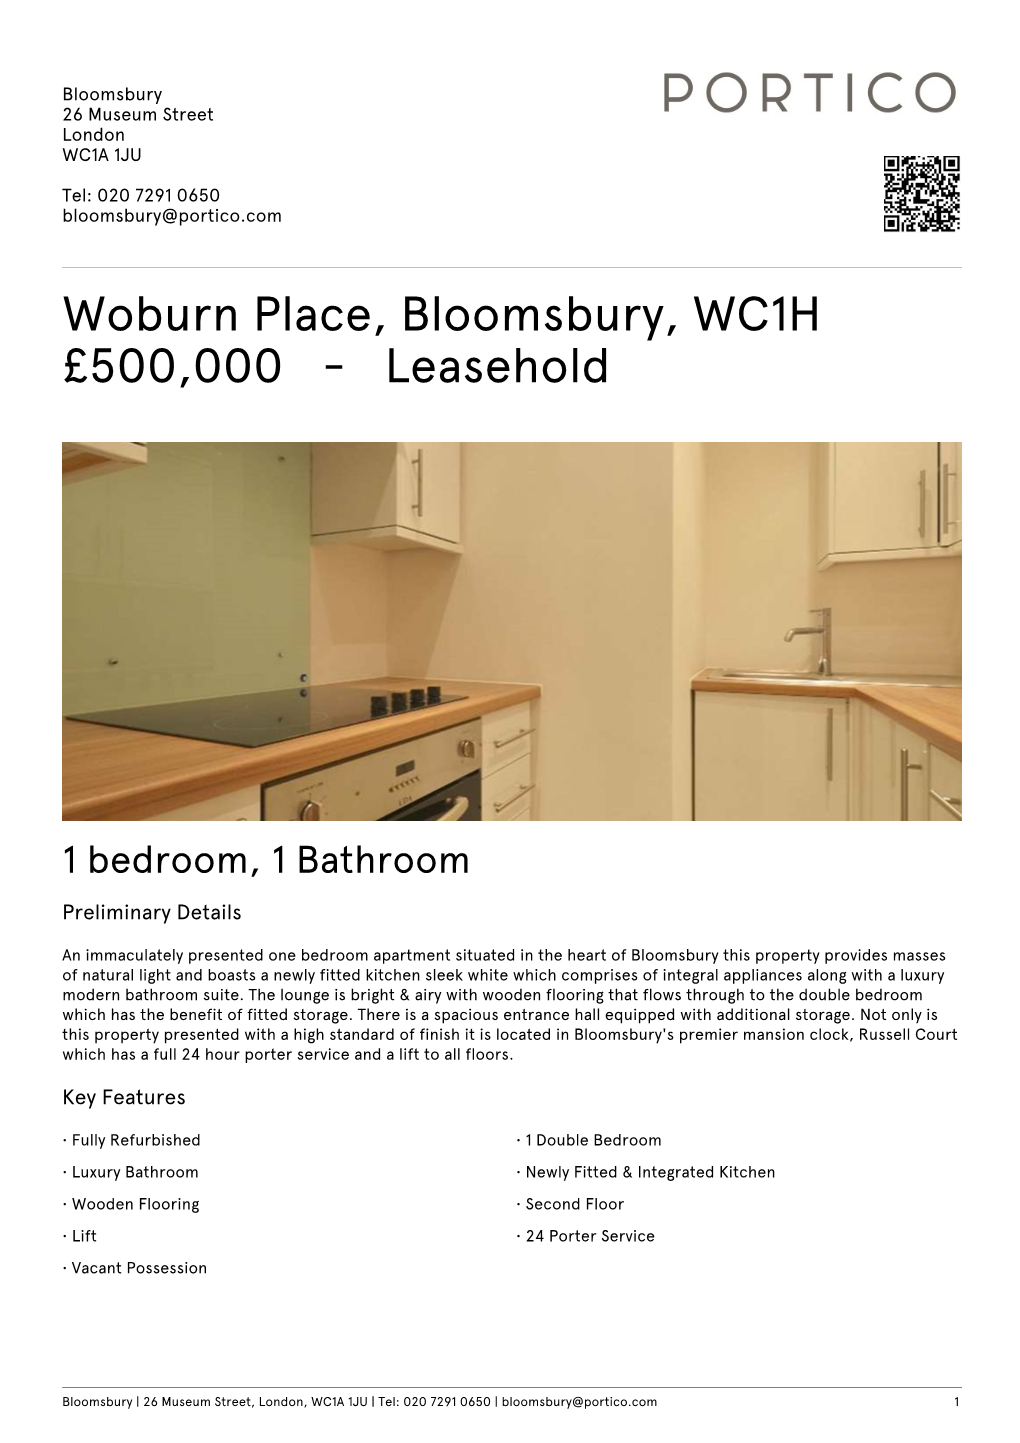 Woburn Place, Bloomsbury, WC1H £500,000